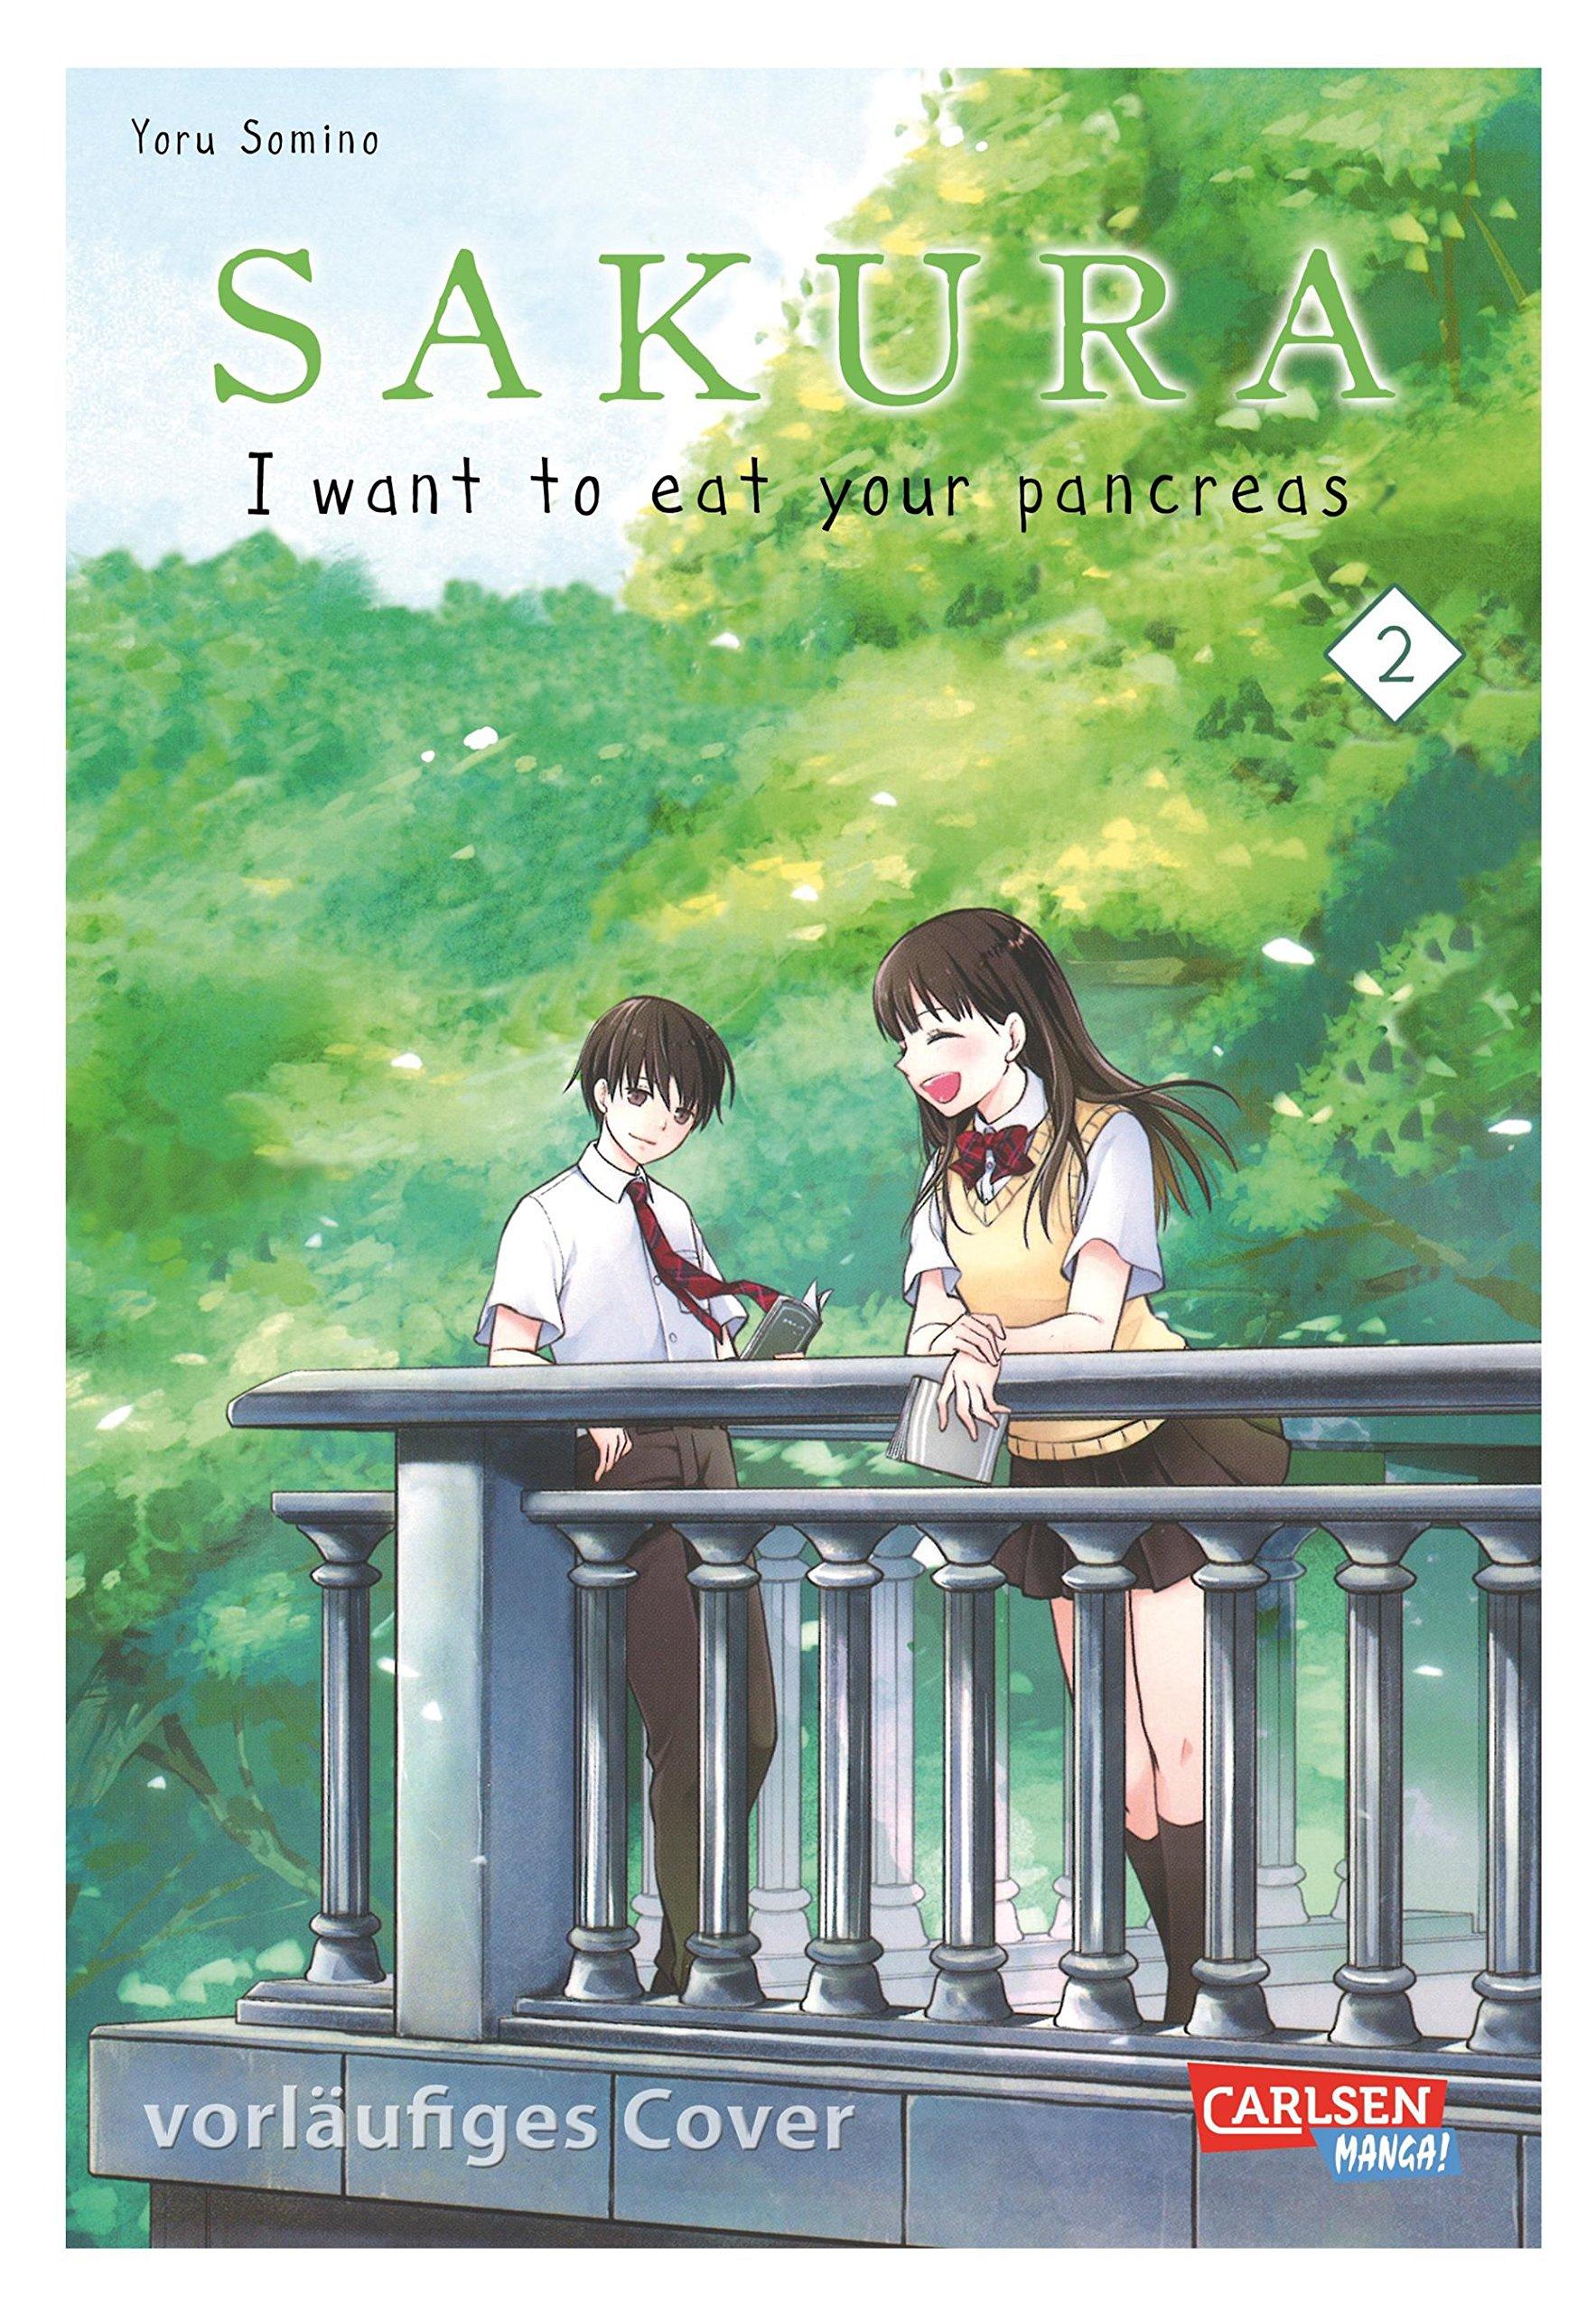 I Want To Eat Your Pancreas Full Hd Wallpaper 4k